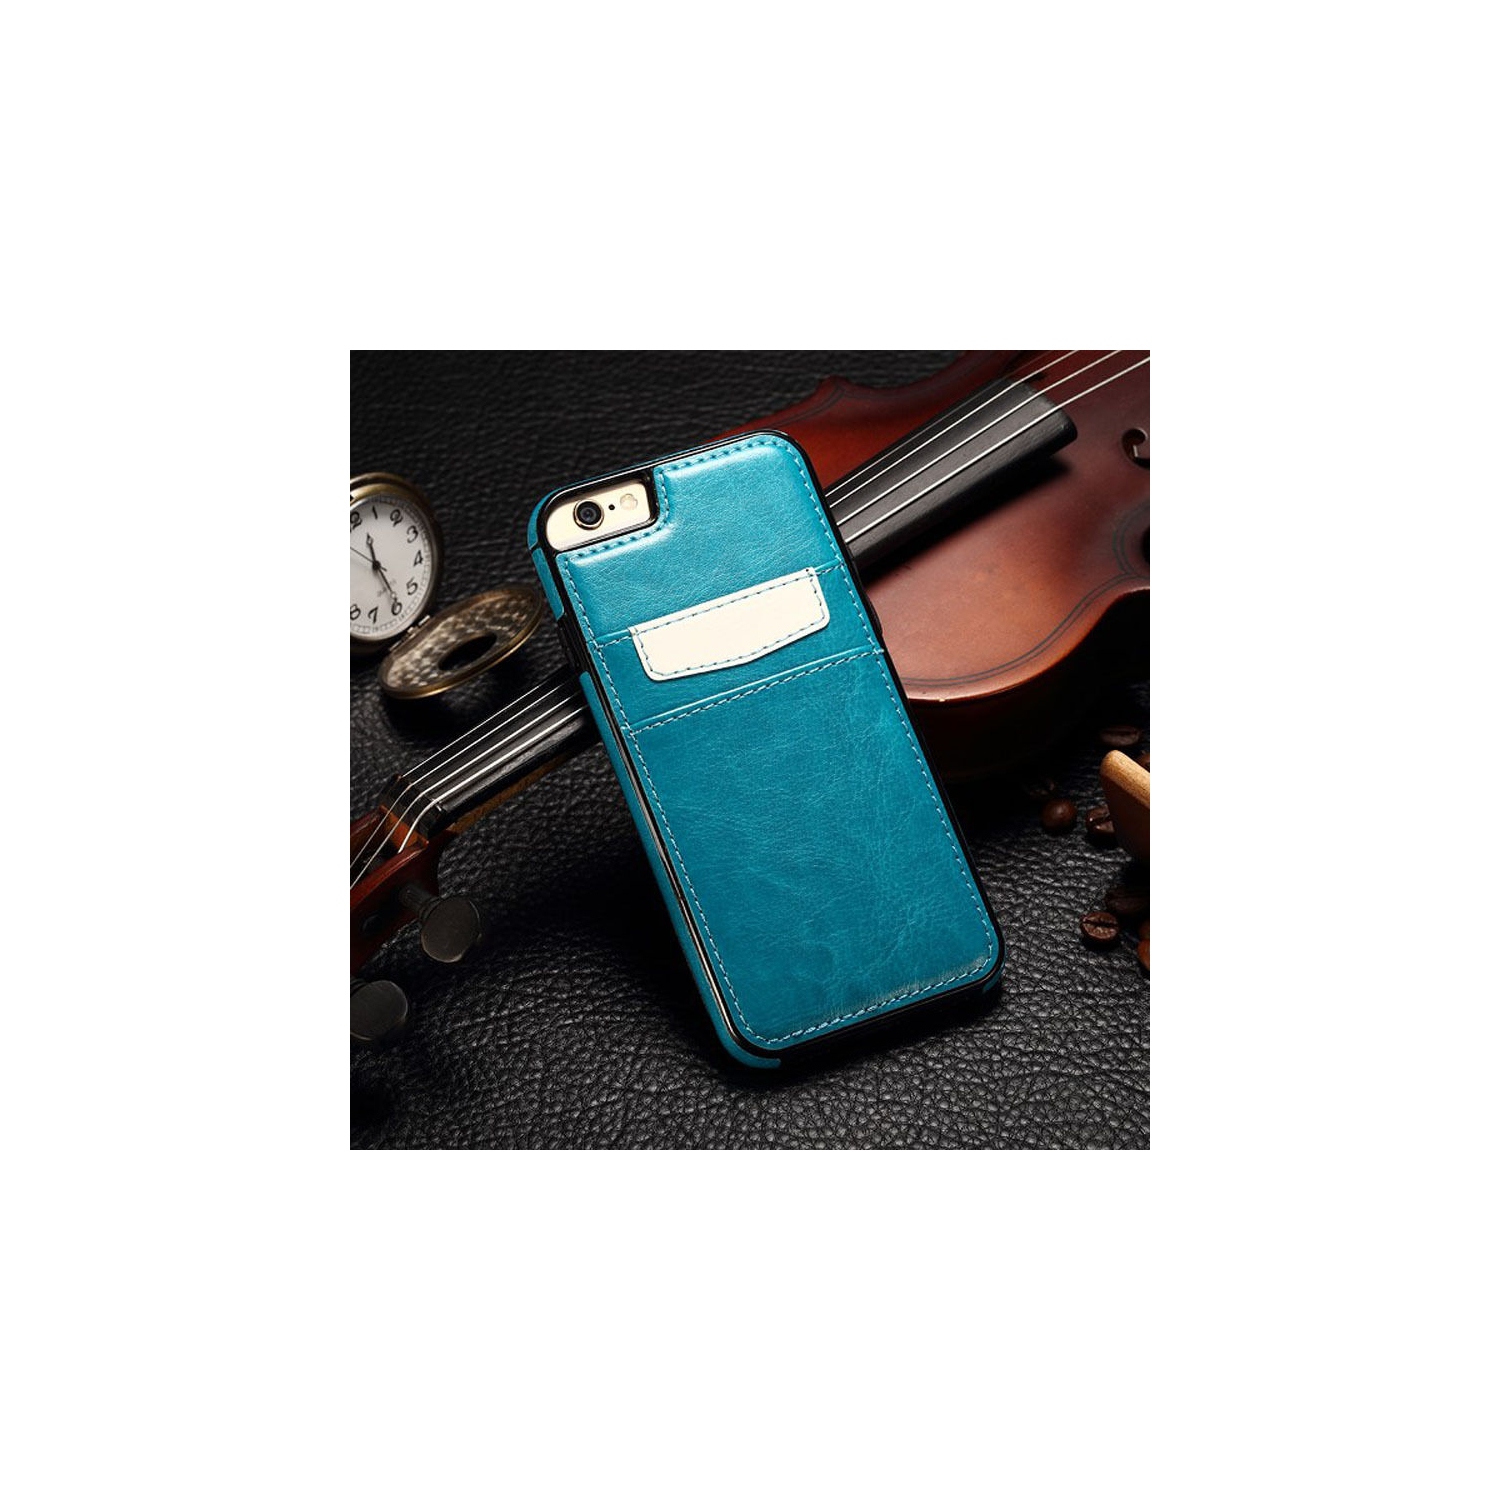 Leather Wallet Credit Card Slots Case Cover For iPhone 7 / 8 (Mint green)